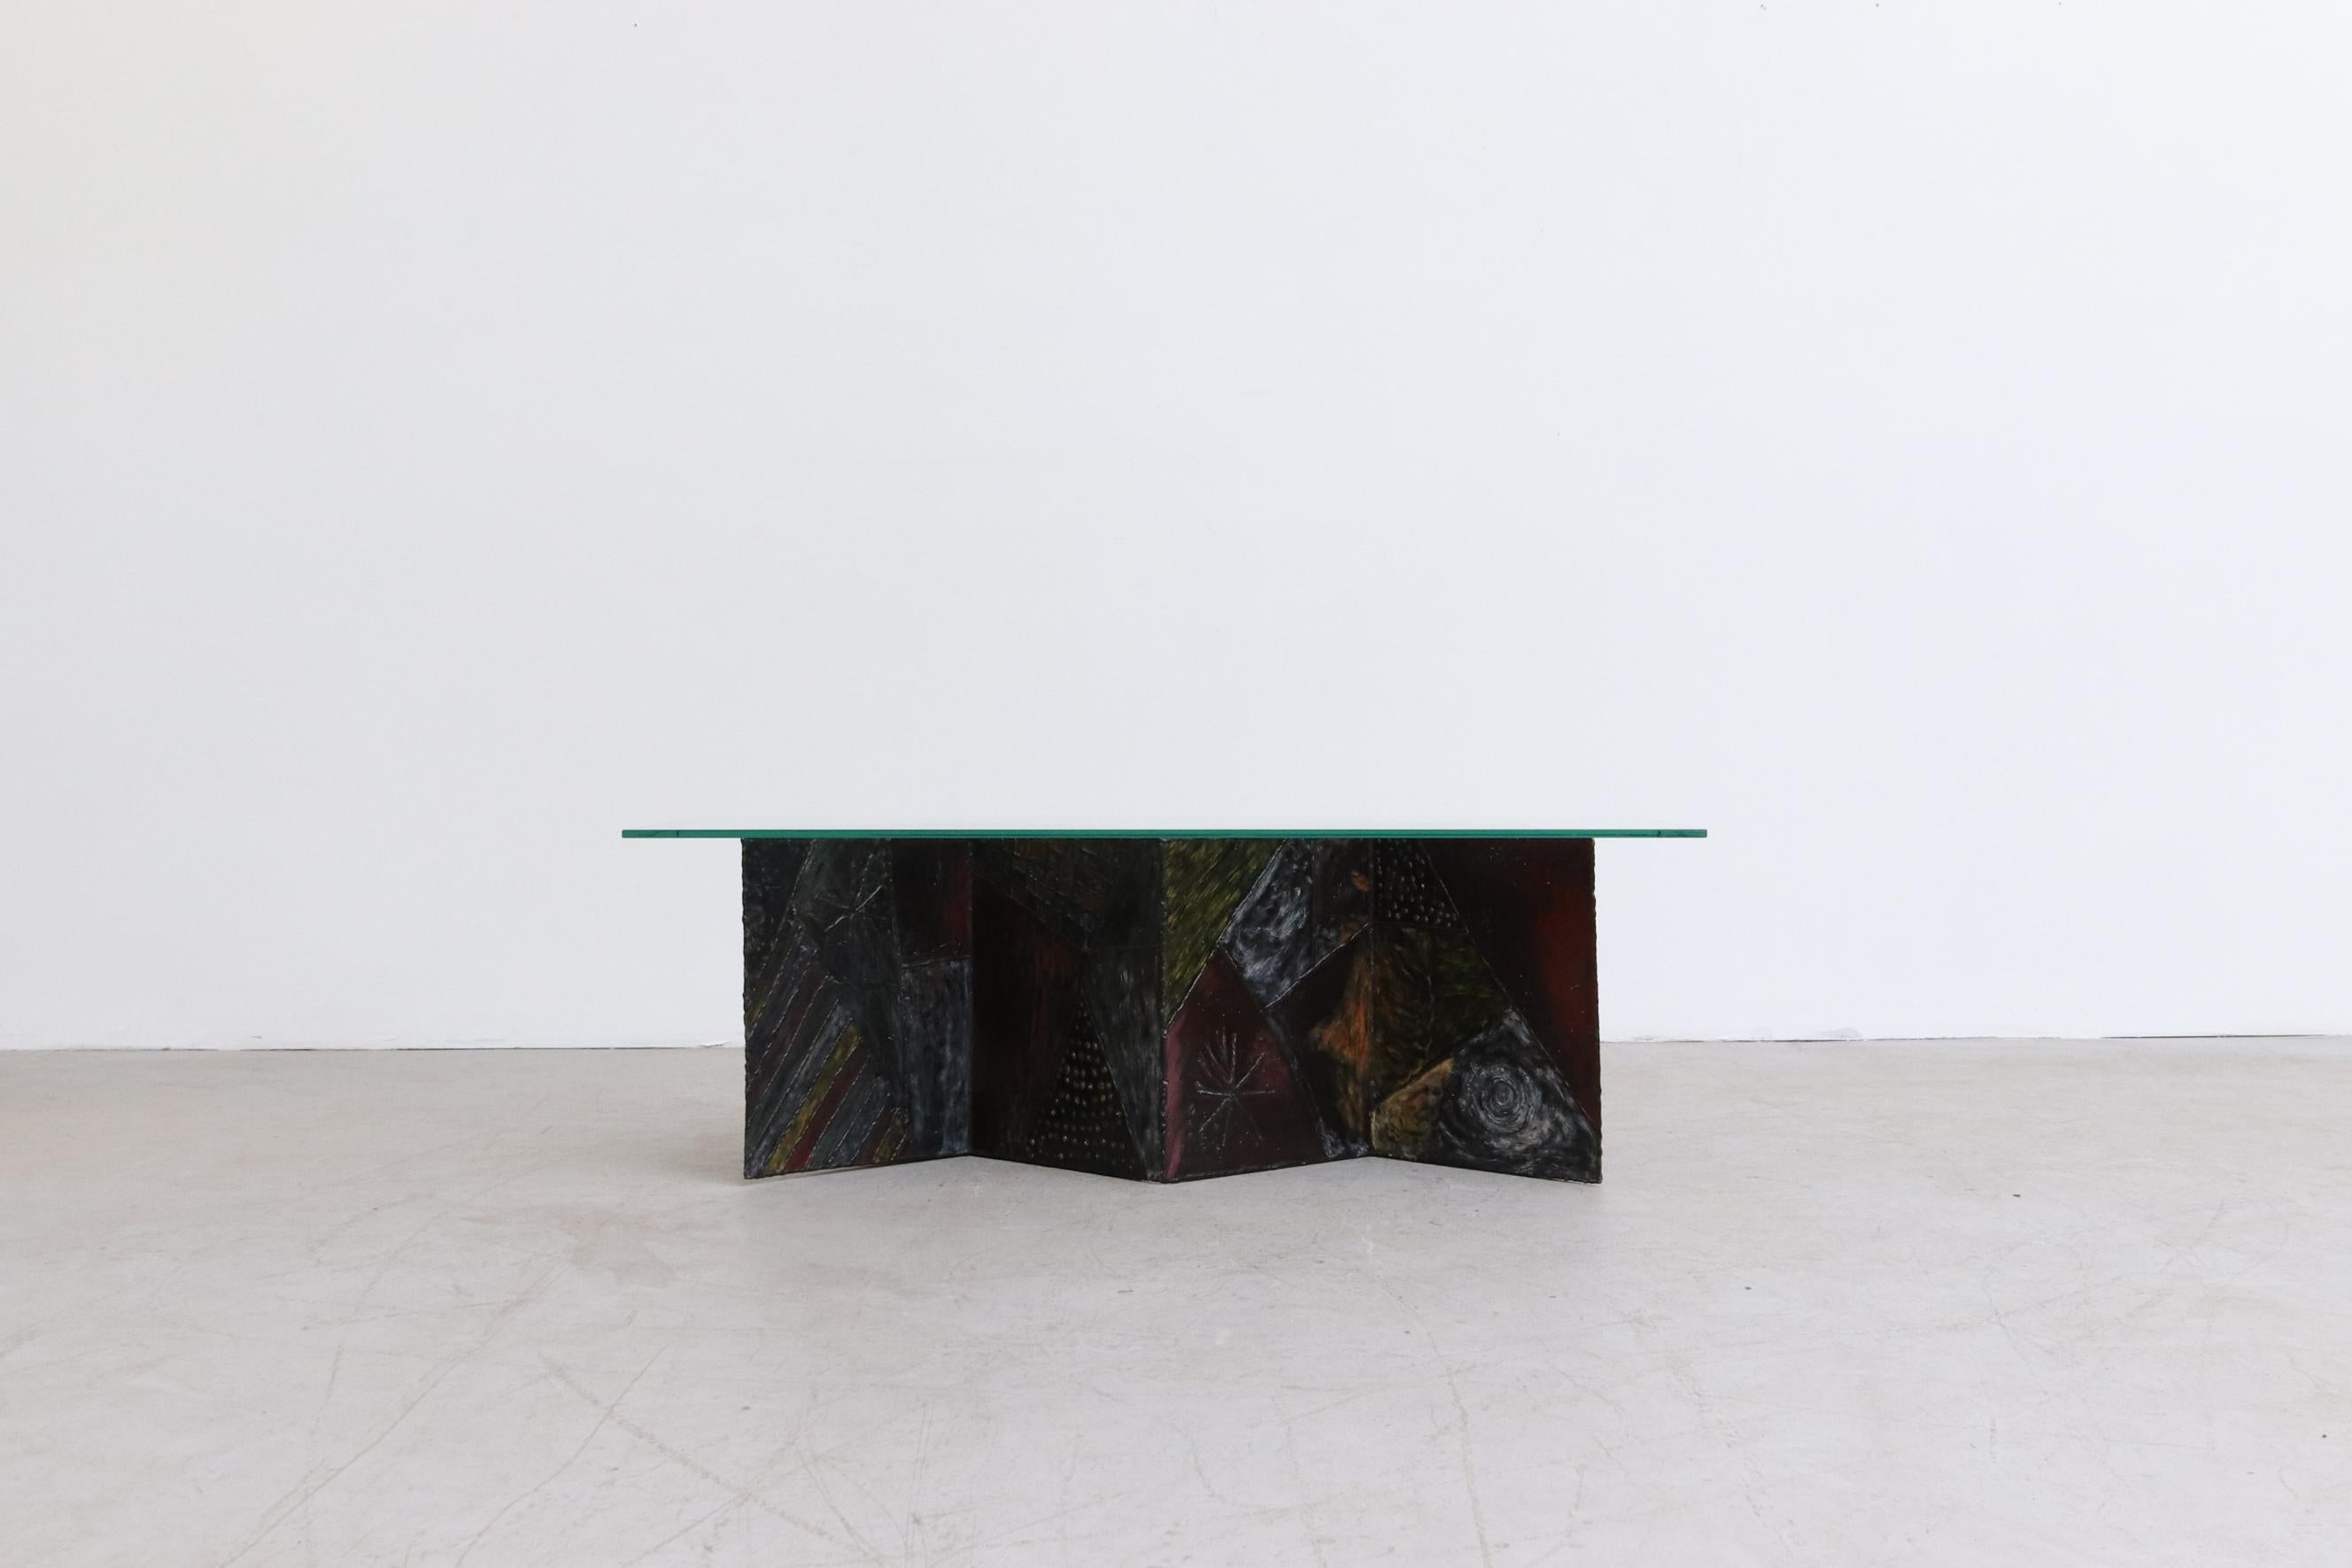 After Paul Evans Brutalist Zig Zag coffee table Model PE-11 with Welded and Painted Body and Glass Top. Glass measures 47.875 x 20 x 0.375. Base measures 38.75 x 13.25 x 15.875. In original condition with visible wear including scratches to glass.